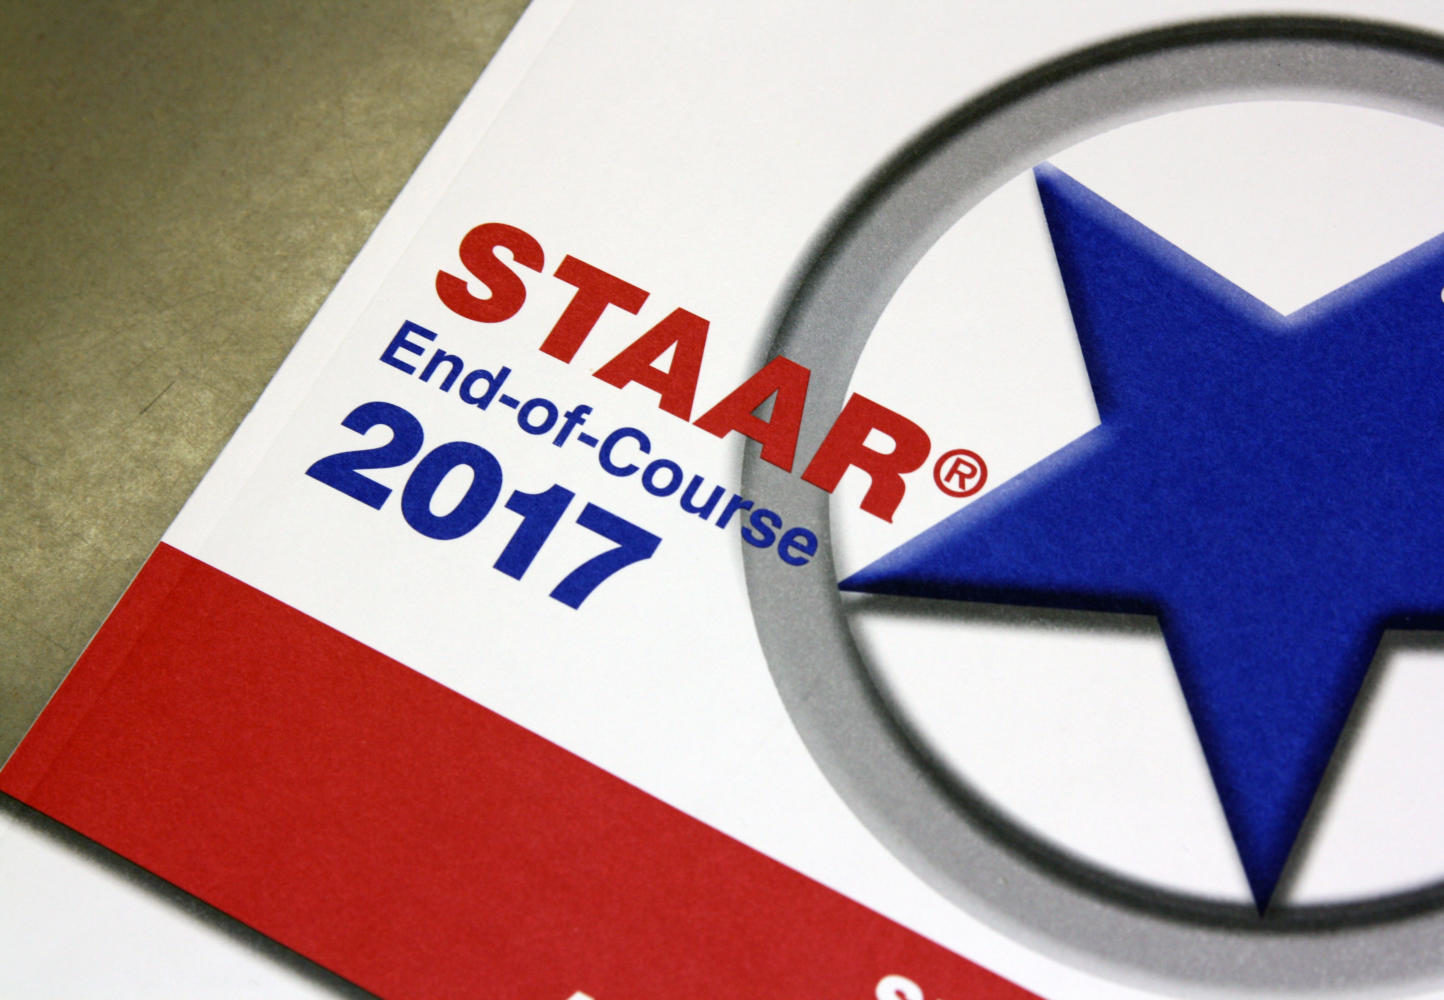 STAAR testing will occur May 2, 3, and 4. 